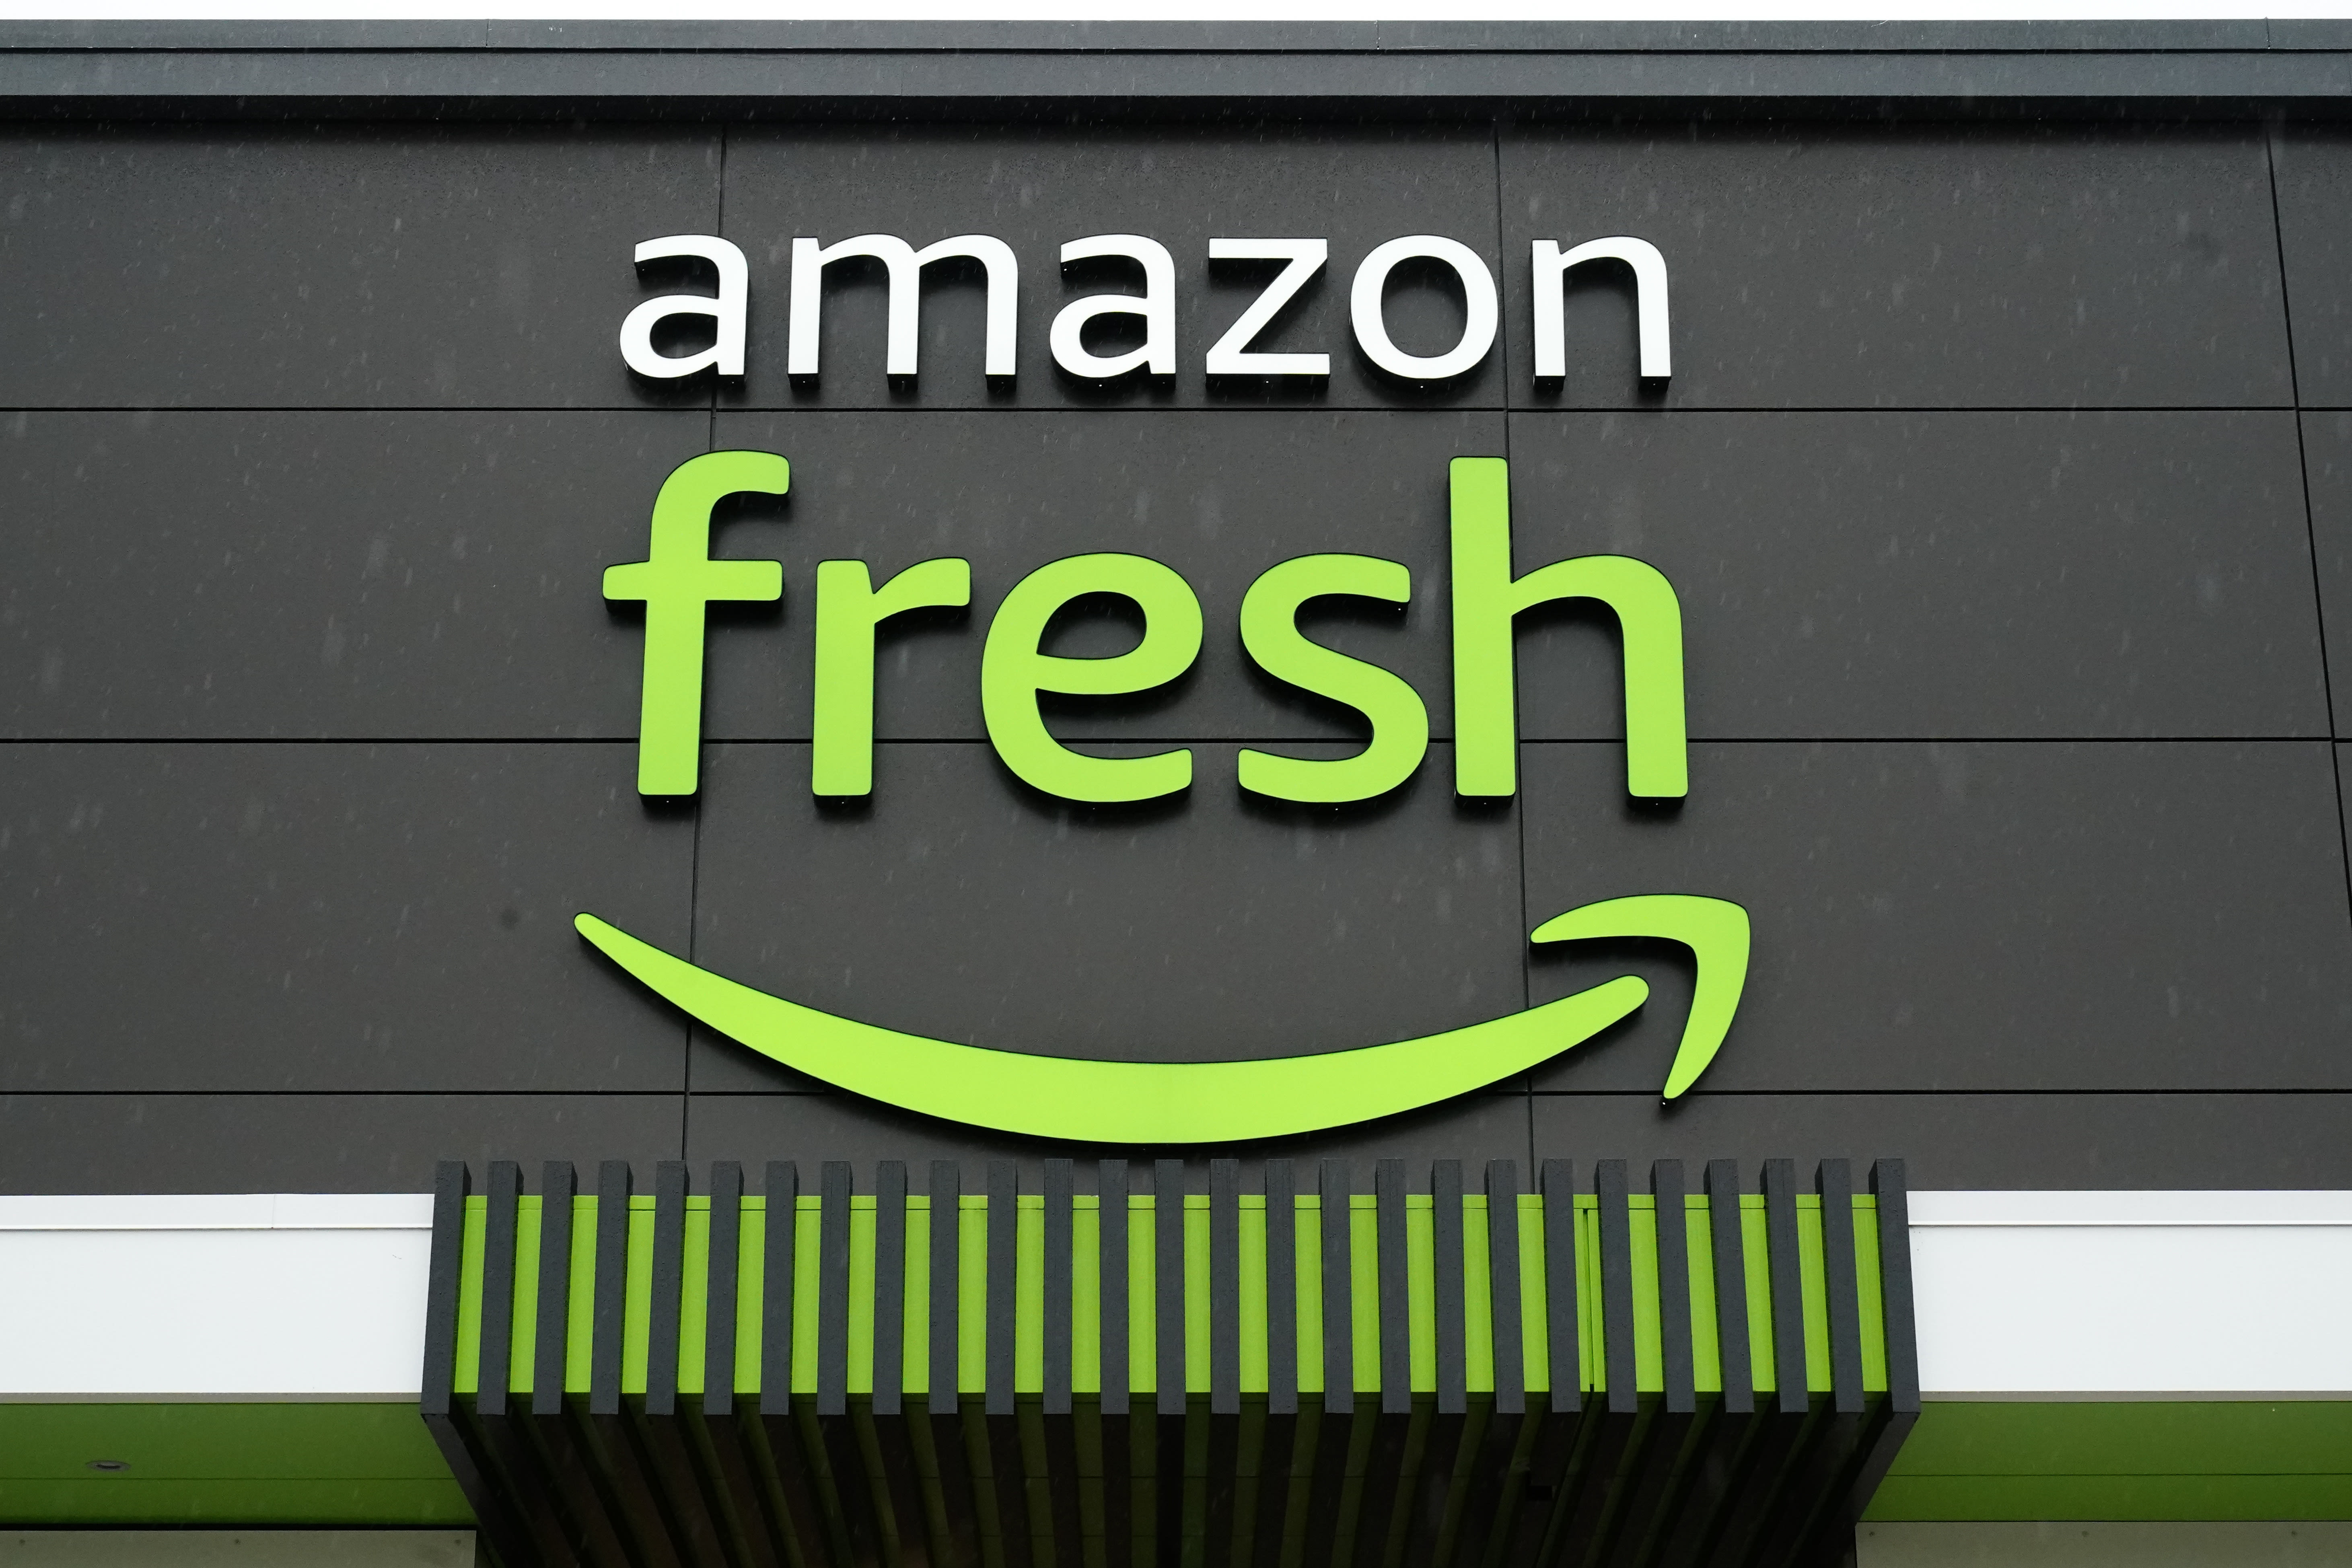 Amazon Fresh becomes latest retailer to suddenly slash high prices